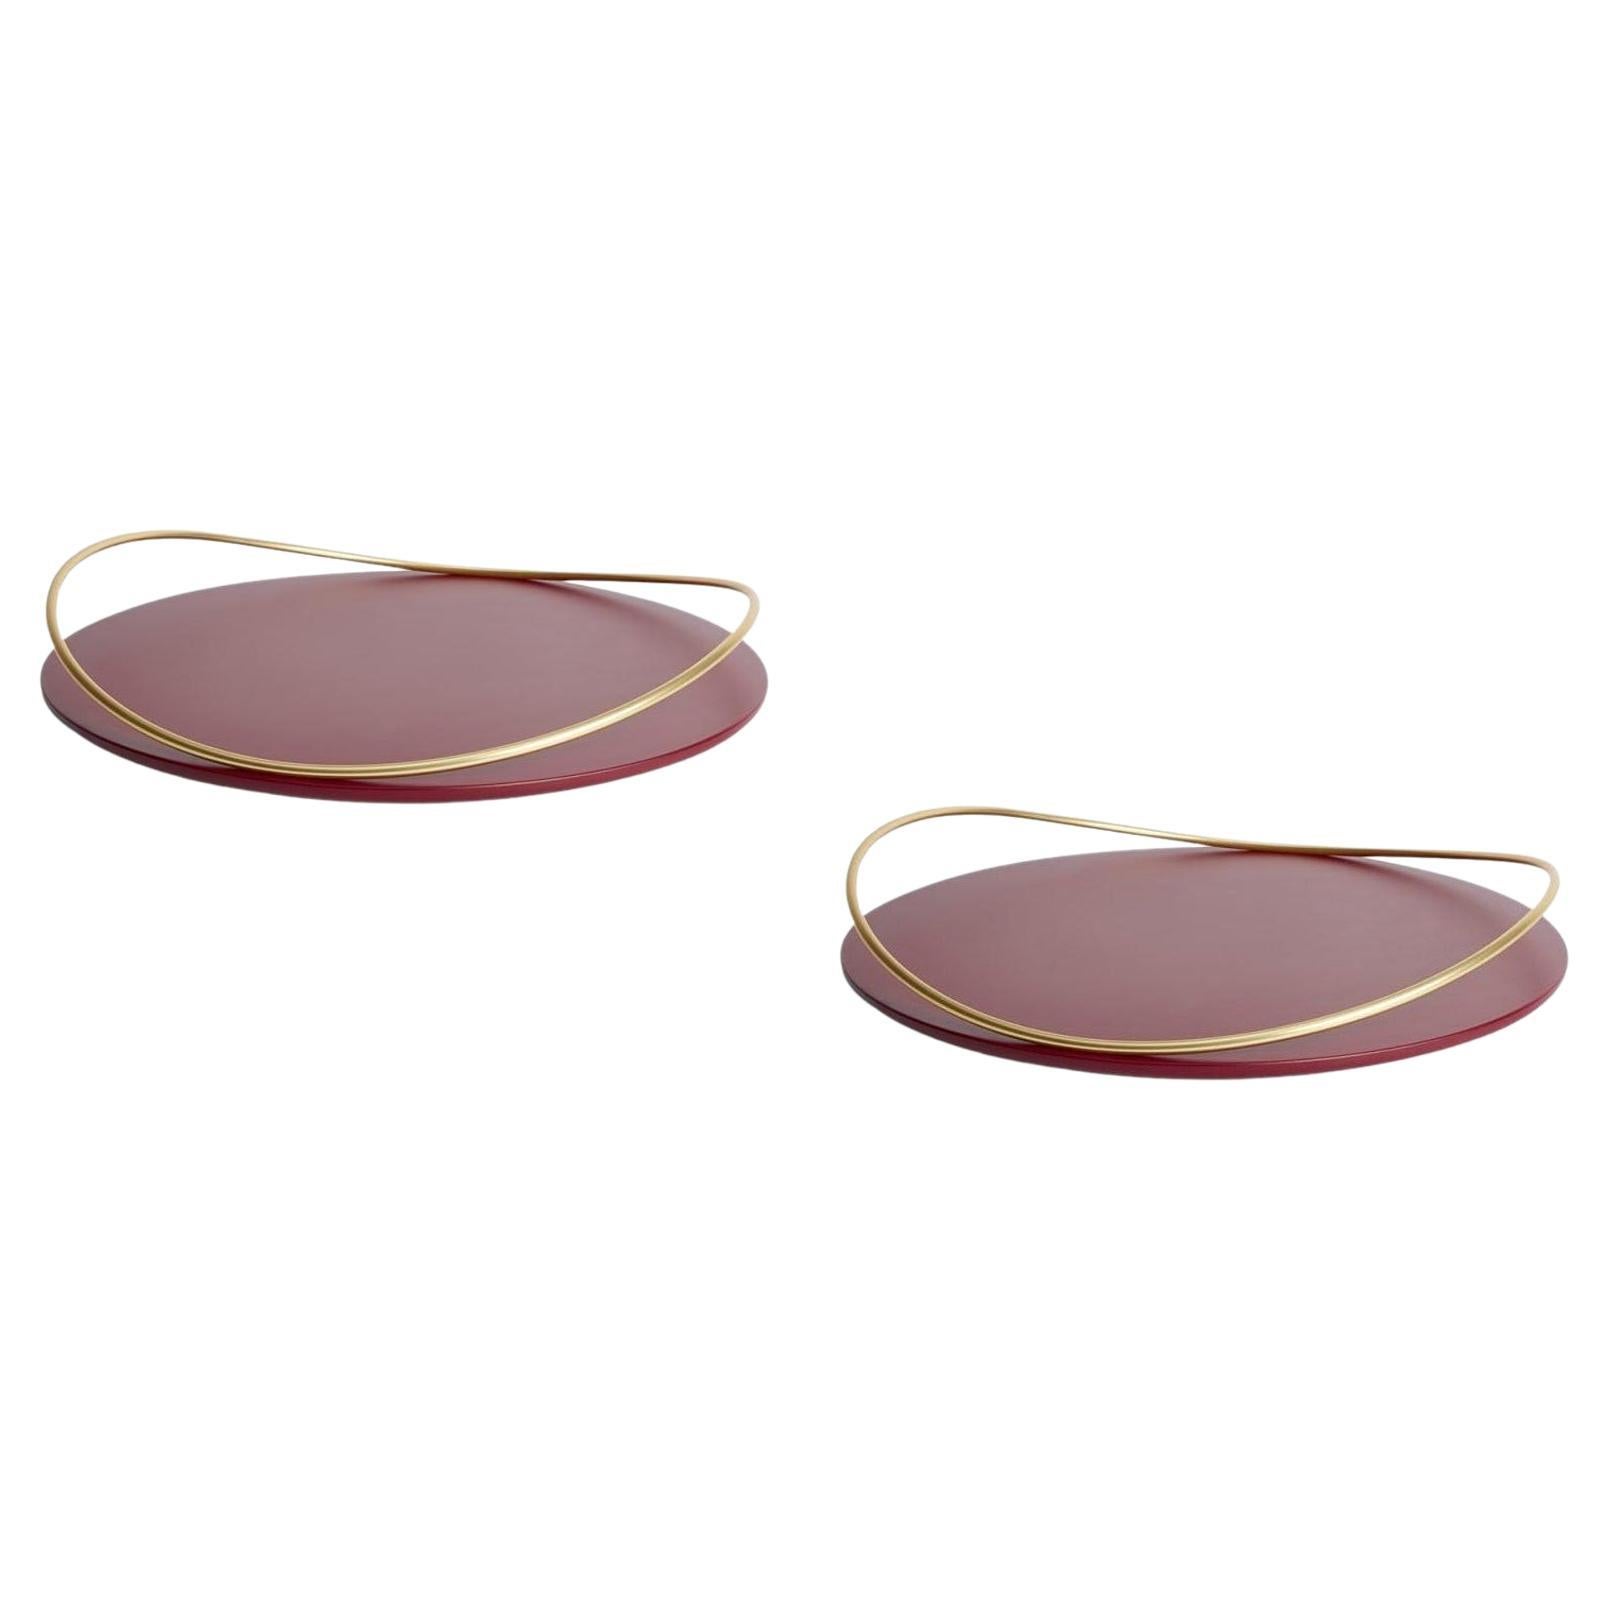 Pair of Bordeaux Touché E Trays by Mason Editions For Sale